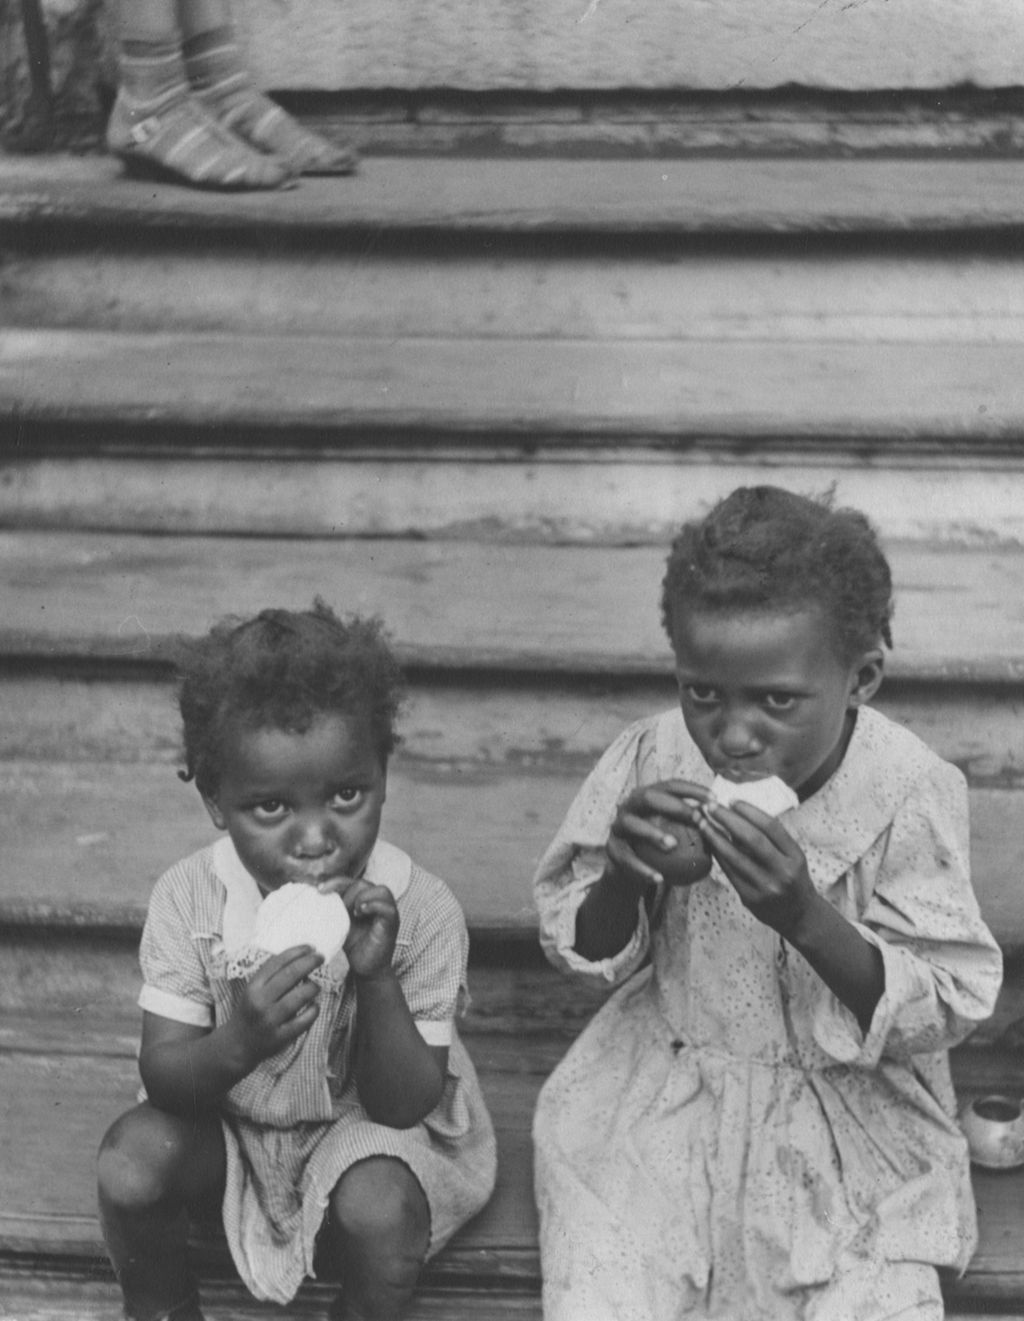 Two girls sitting on steps, having a snack